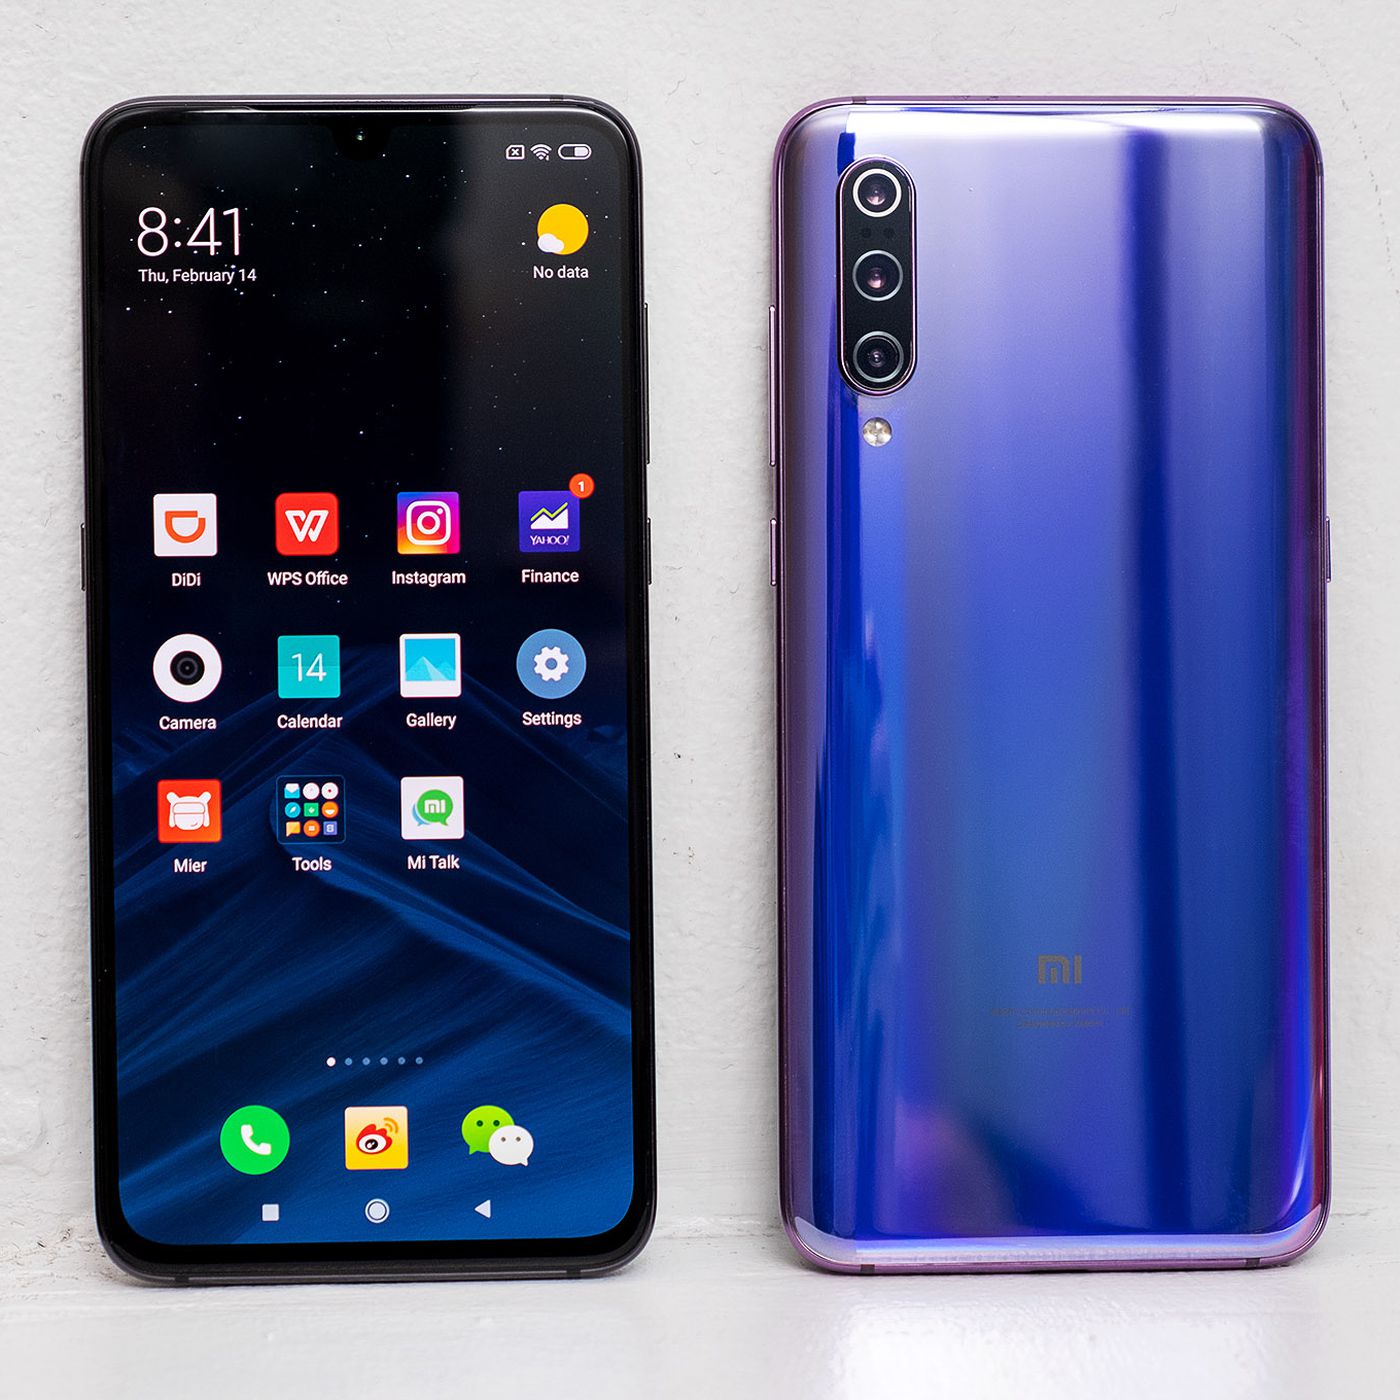 The best Chinese smartphones of 2018 in terms of price and quality